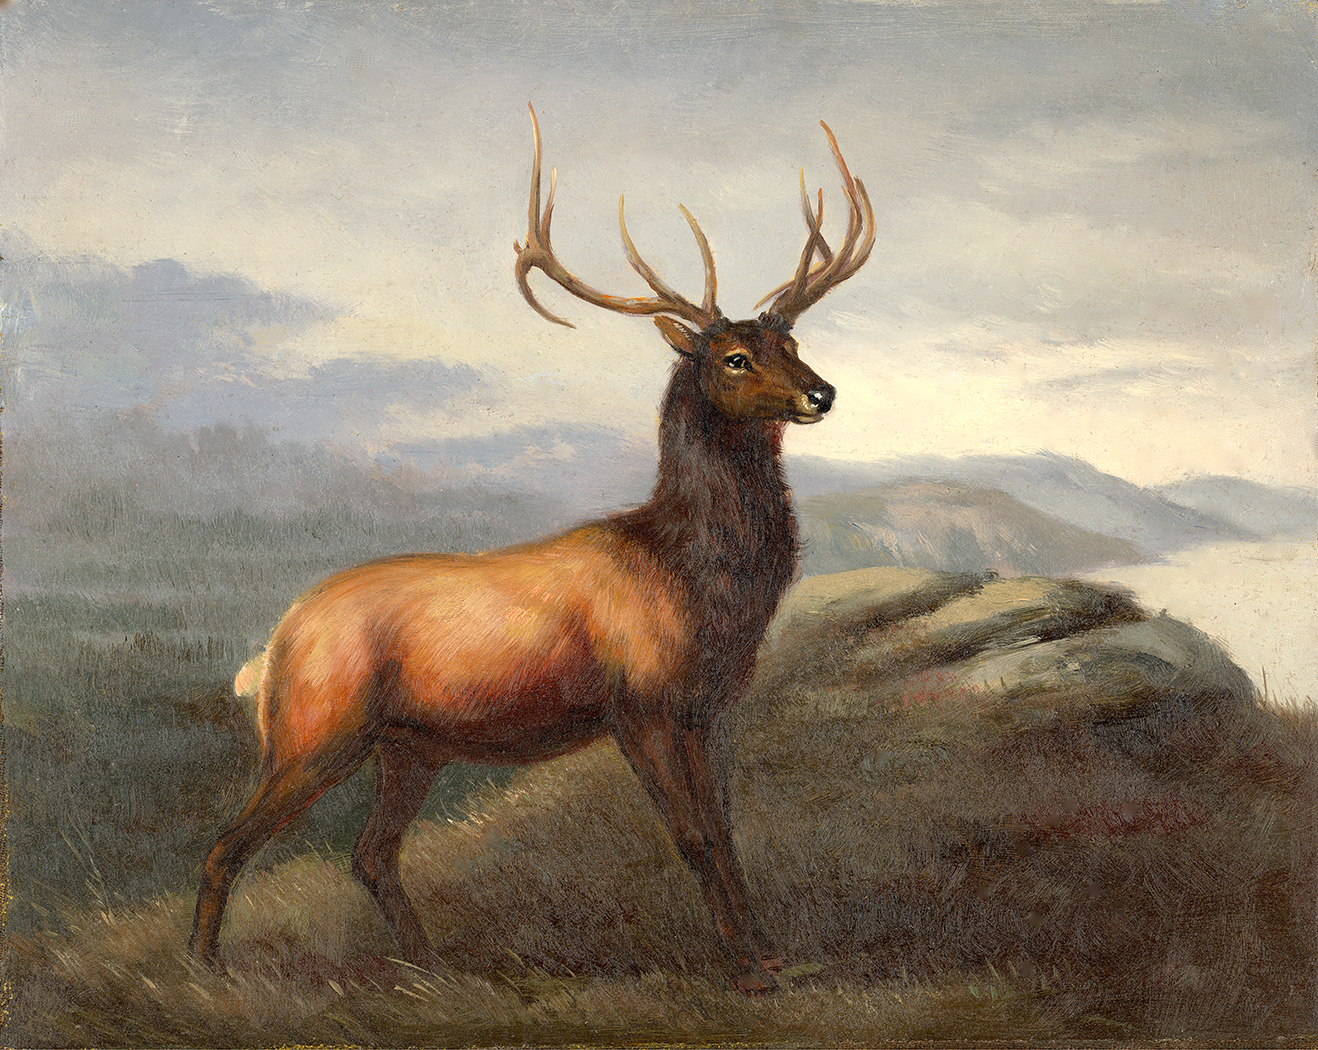 Cabin/Lodge Early American White Tail Stag Framed Oil Painting Pr ...